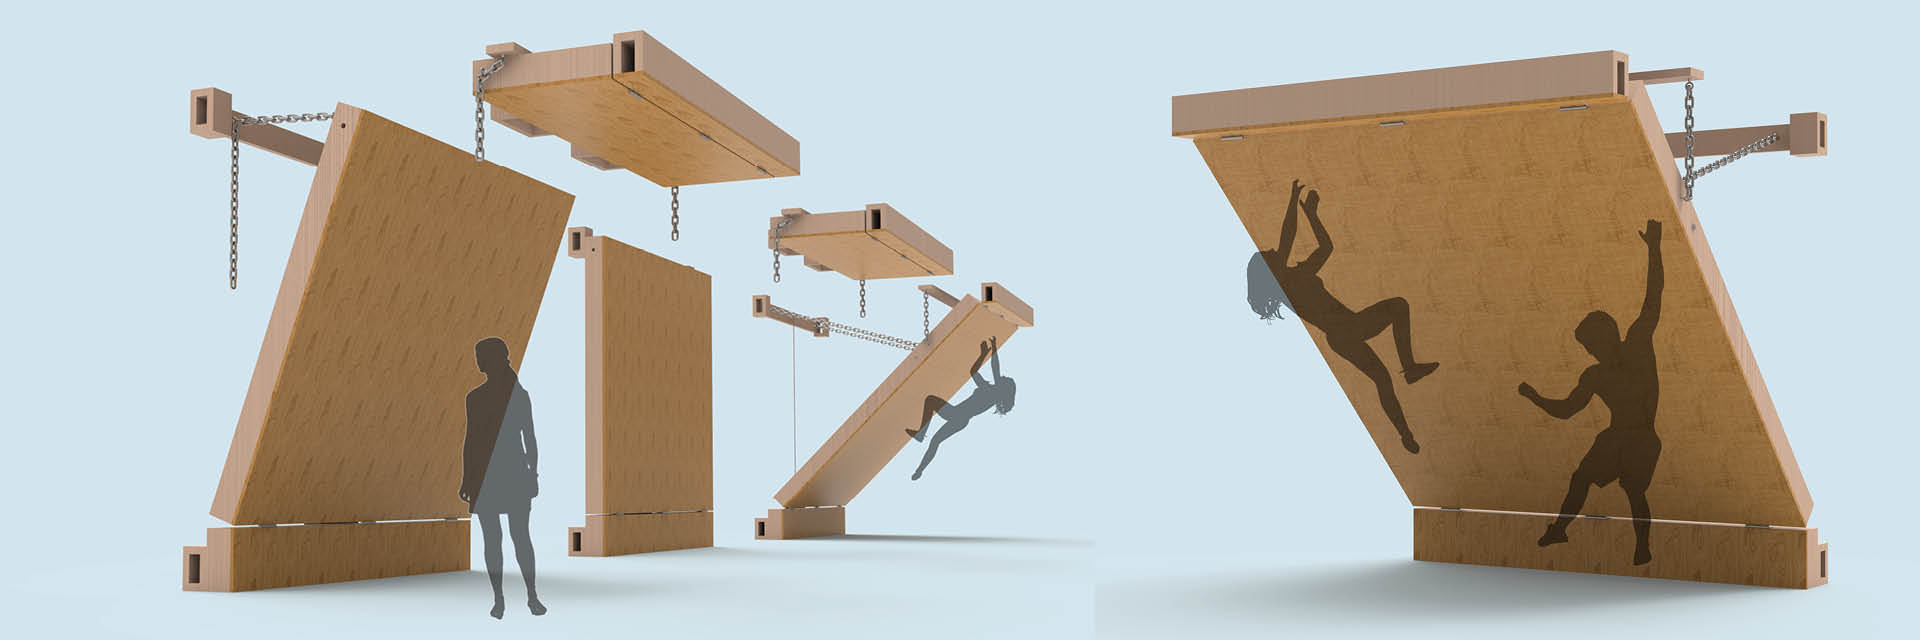 Renders of a climbing wall set